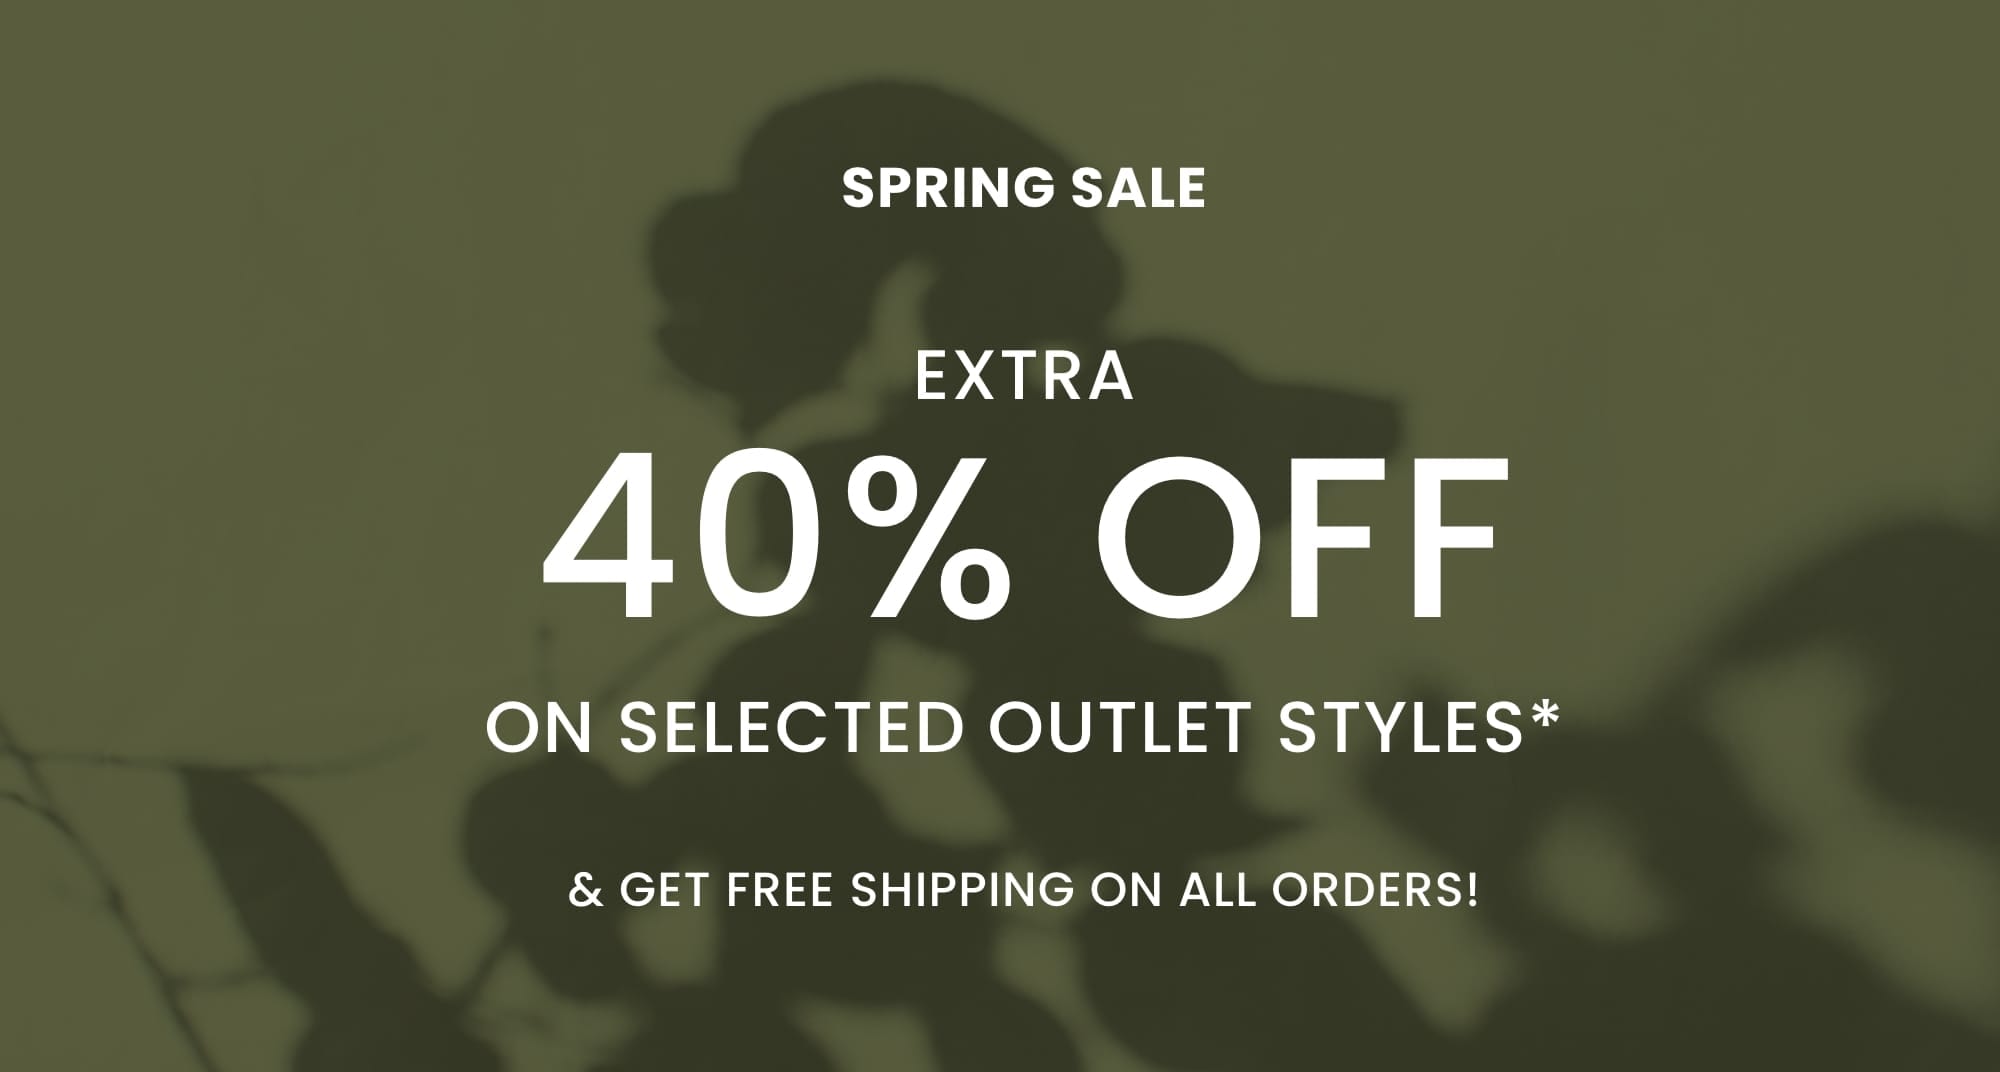 EXTRA 40% OFF ON SELECTED OUTLET STYLES*